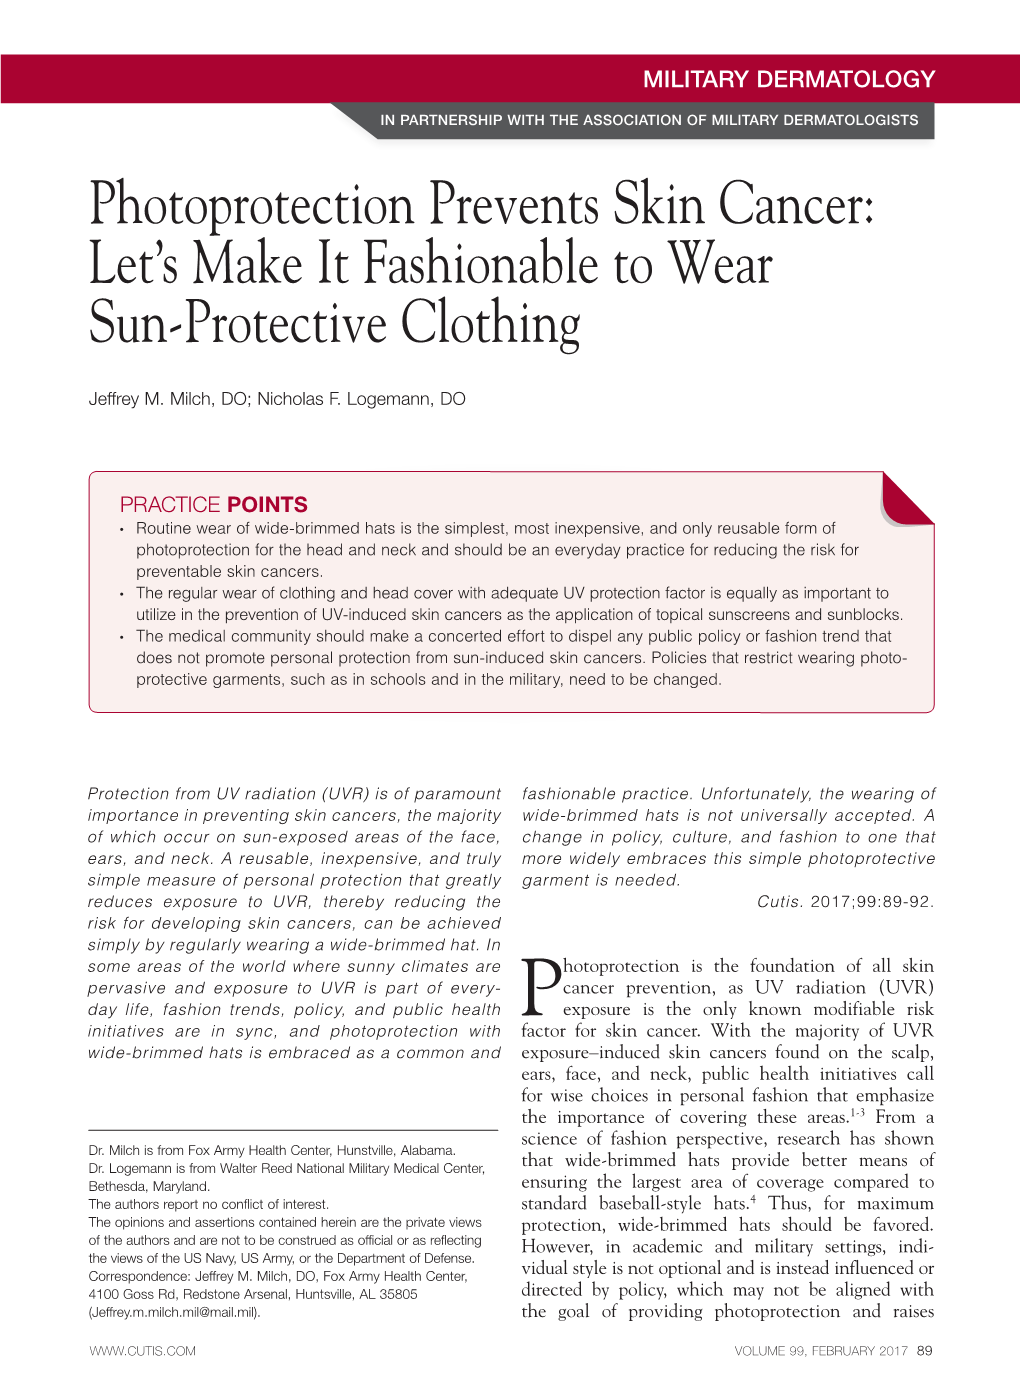 Photoprotection Prevents Skin Cancer: Let’S Make It Fashionable to Wear Sun-Protective Clothing